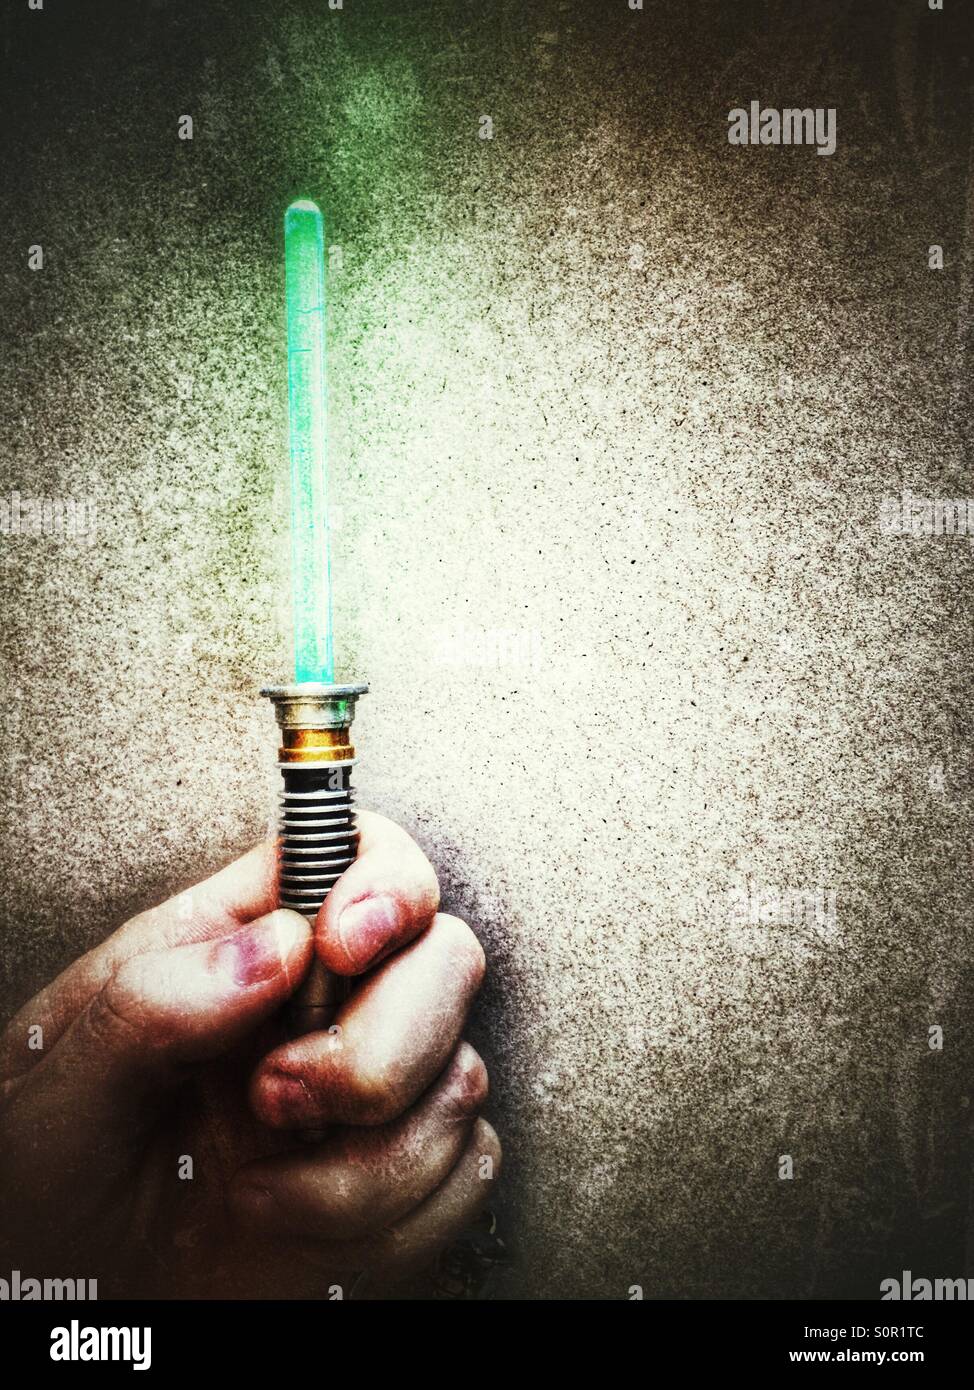 S20 LightSaber wallpaper by MobileWallpapers  Download on ZEDGE  21e7